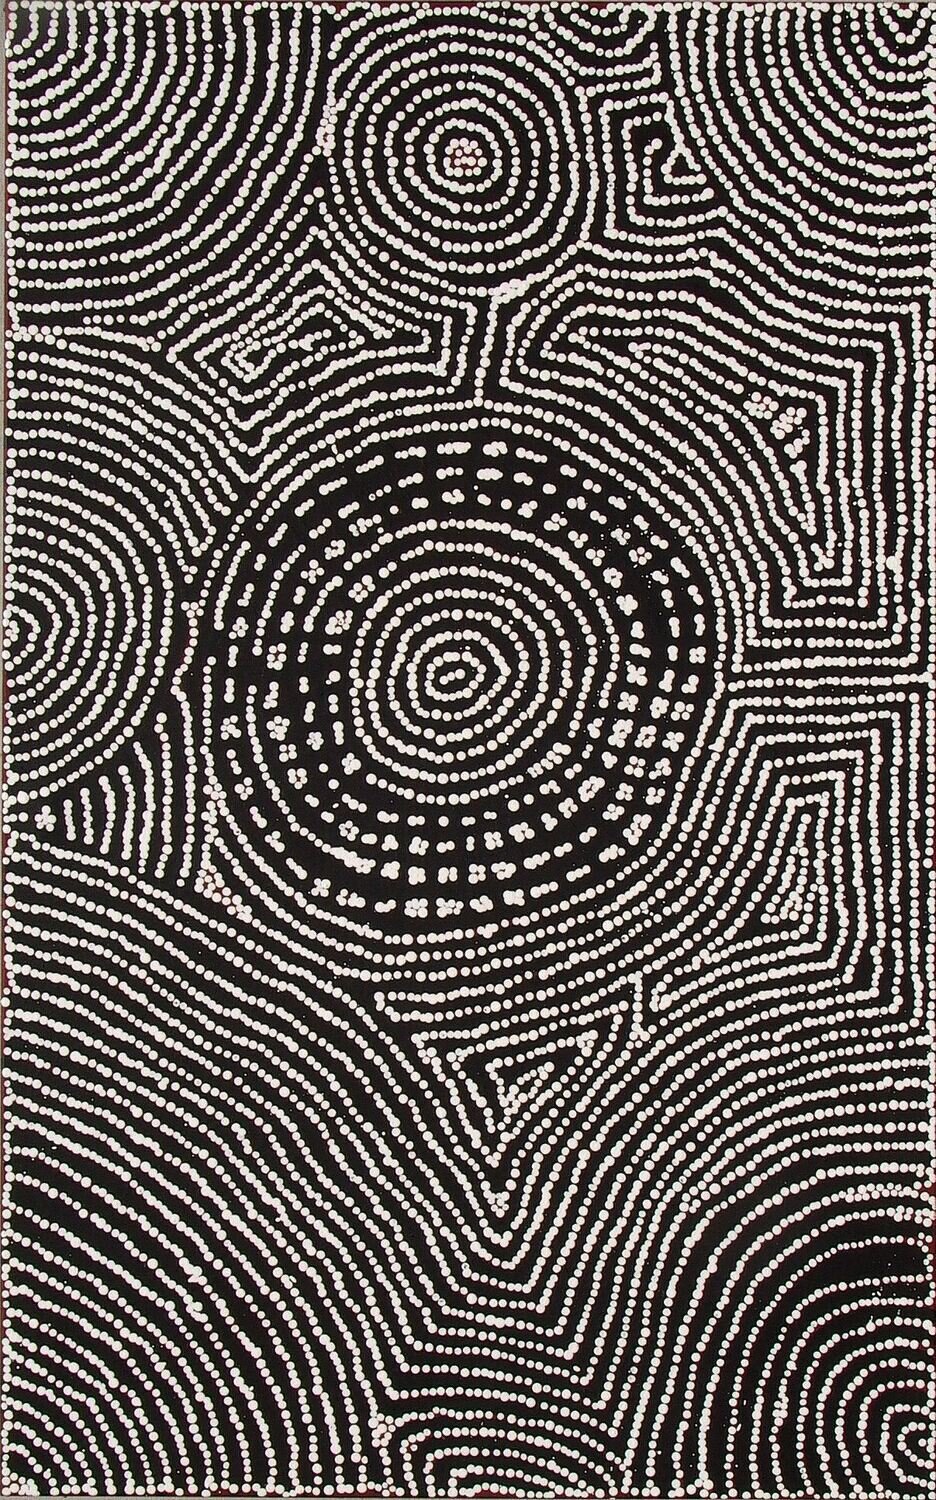 Tingari Cycle (2005) by Barney Campbell Tjakamarra 122x76cm Cat 9454BC